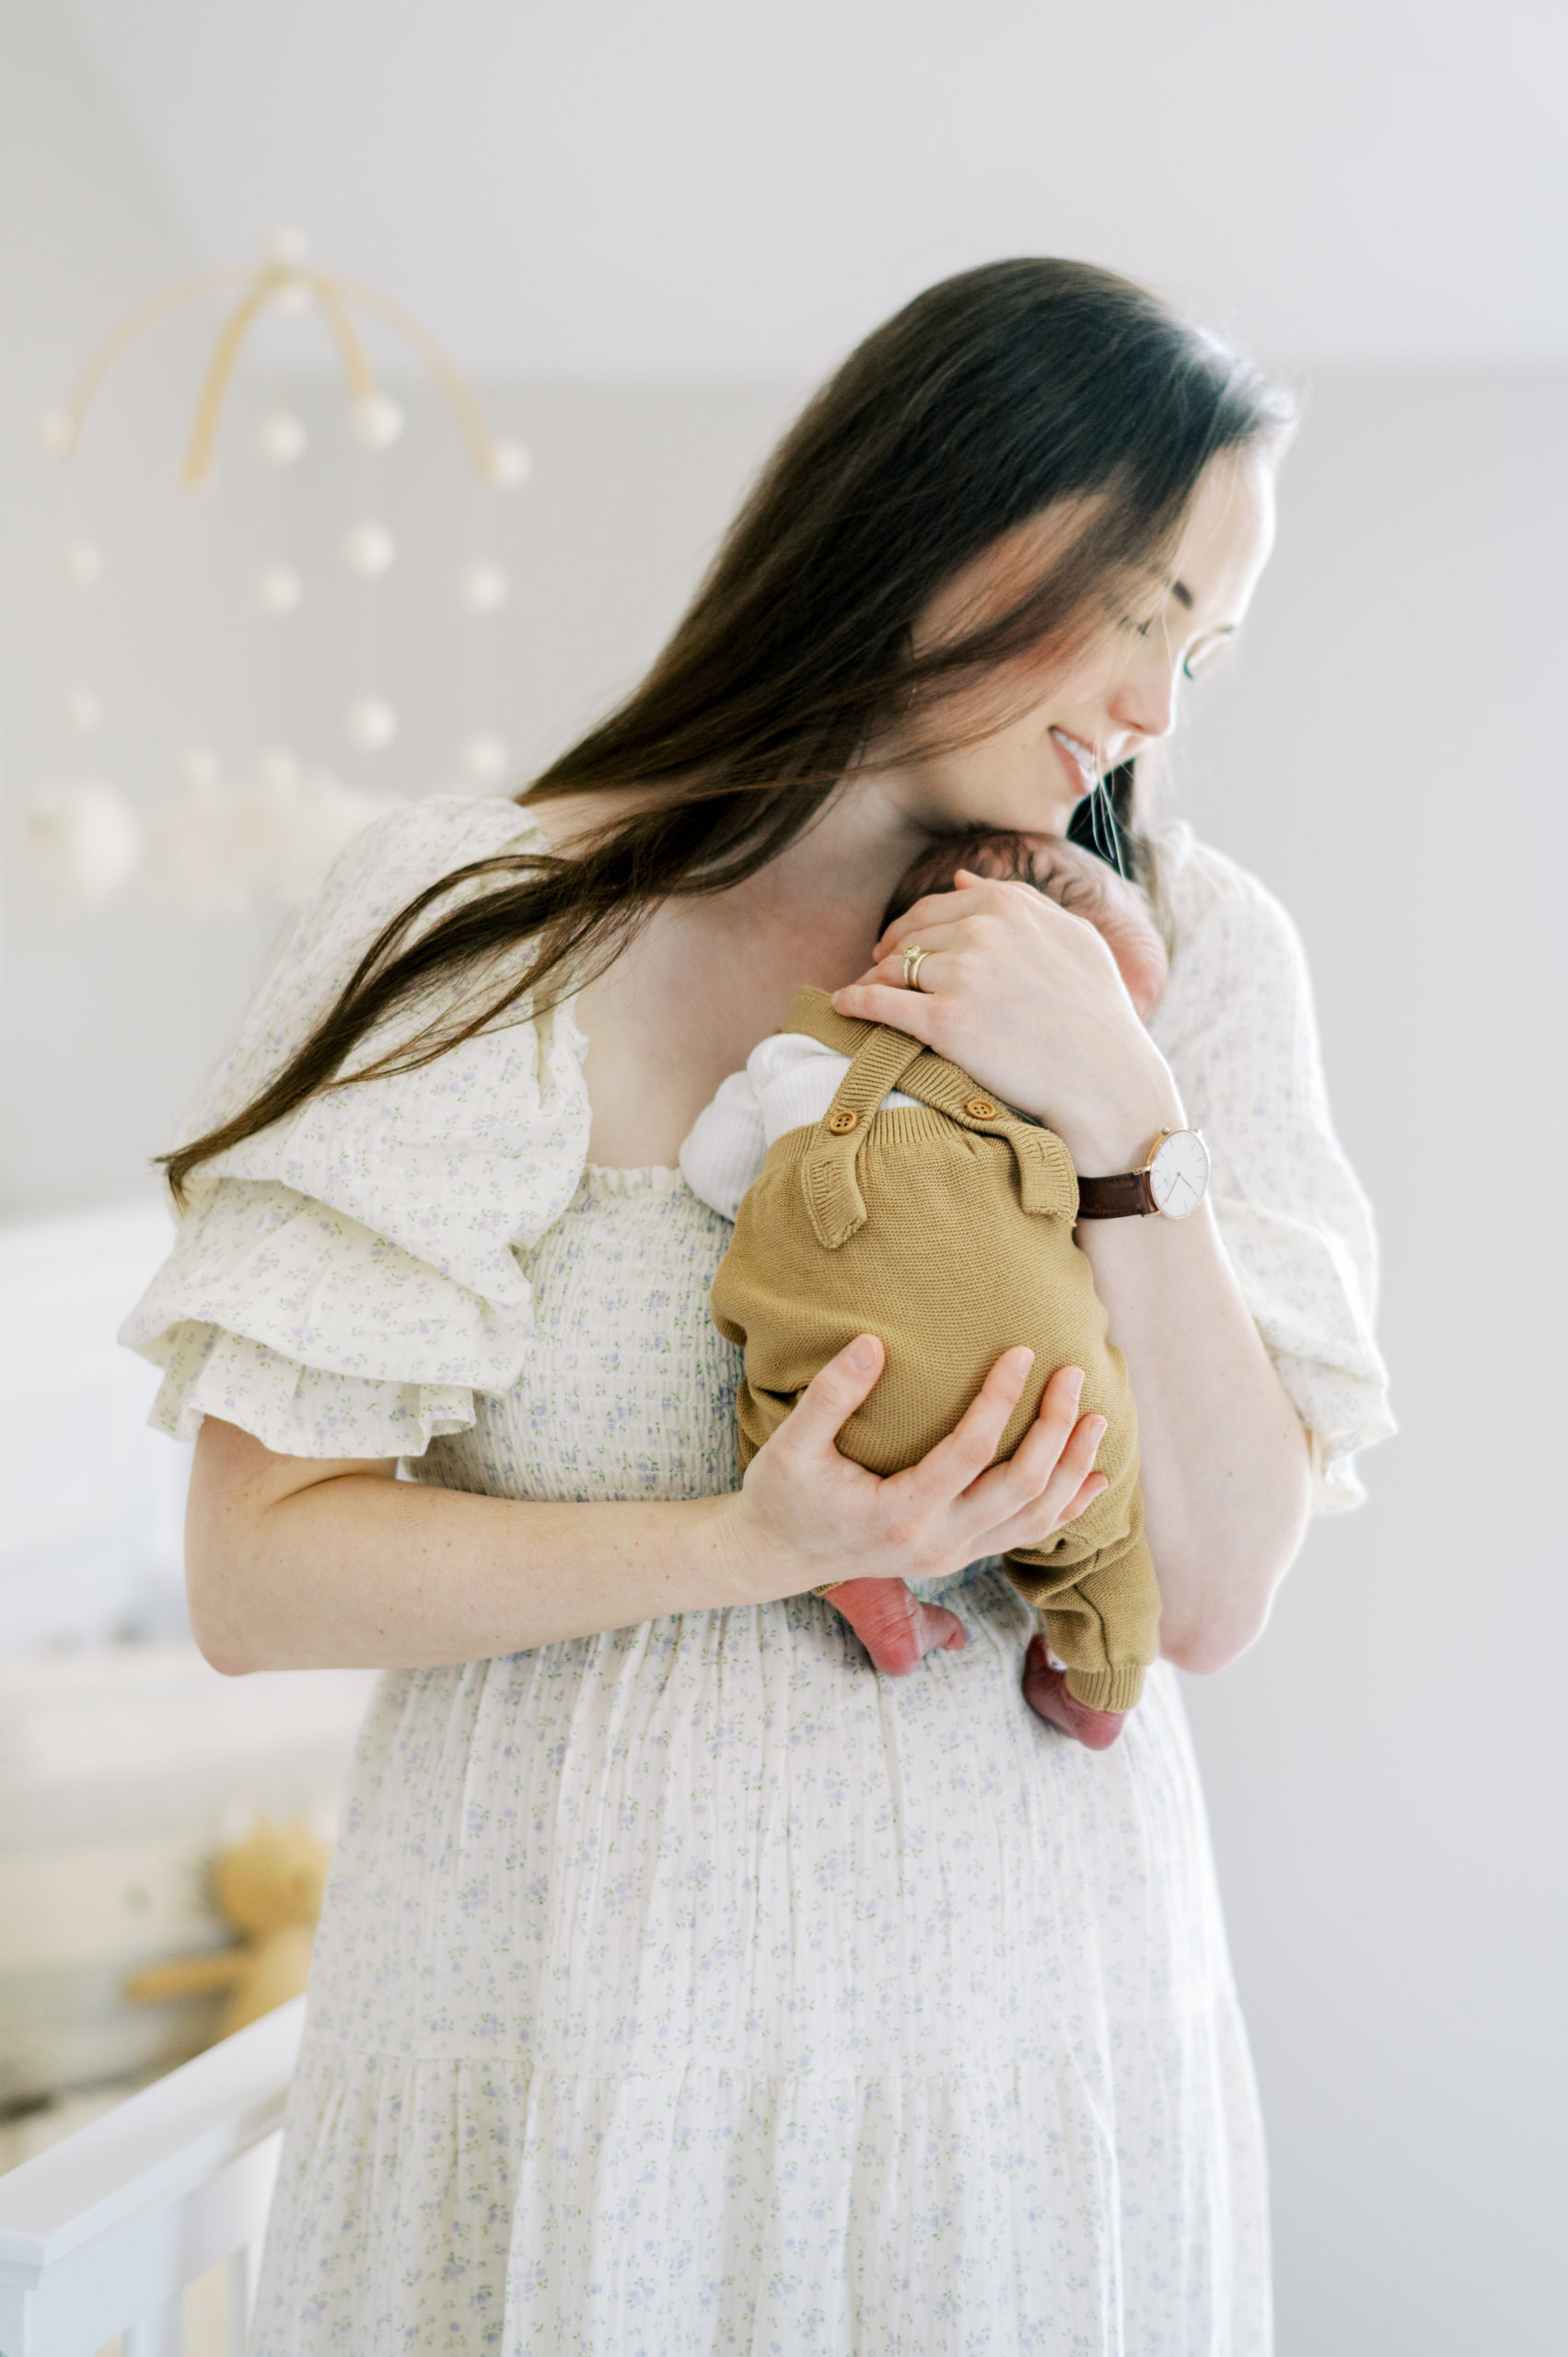 Postpartum recovery tips after baby #2